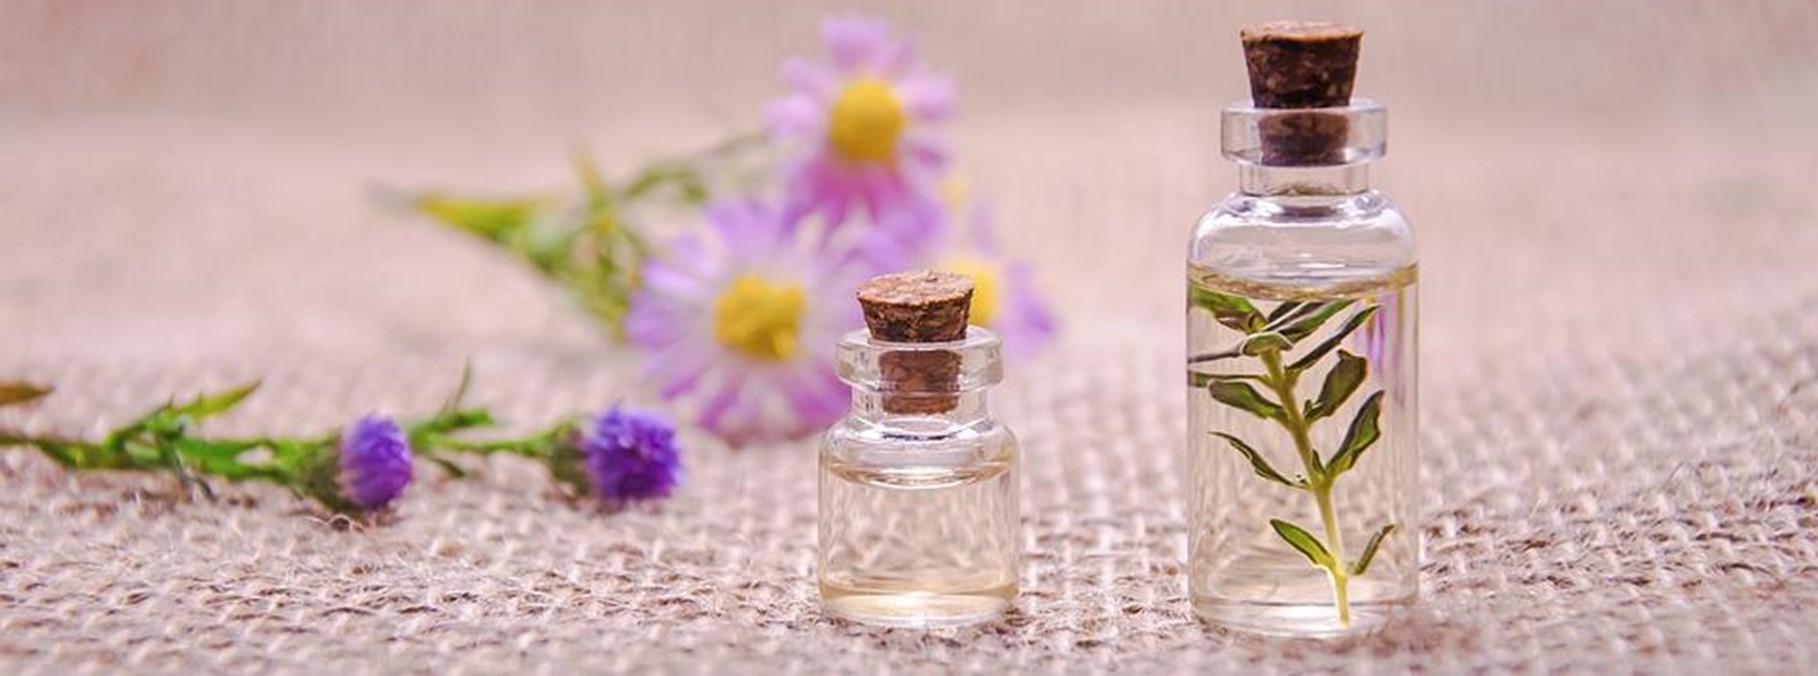 Aromatherapy and Pregnancy: A Simple Guide